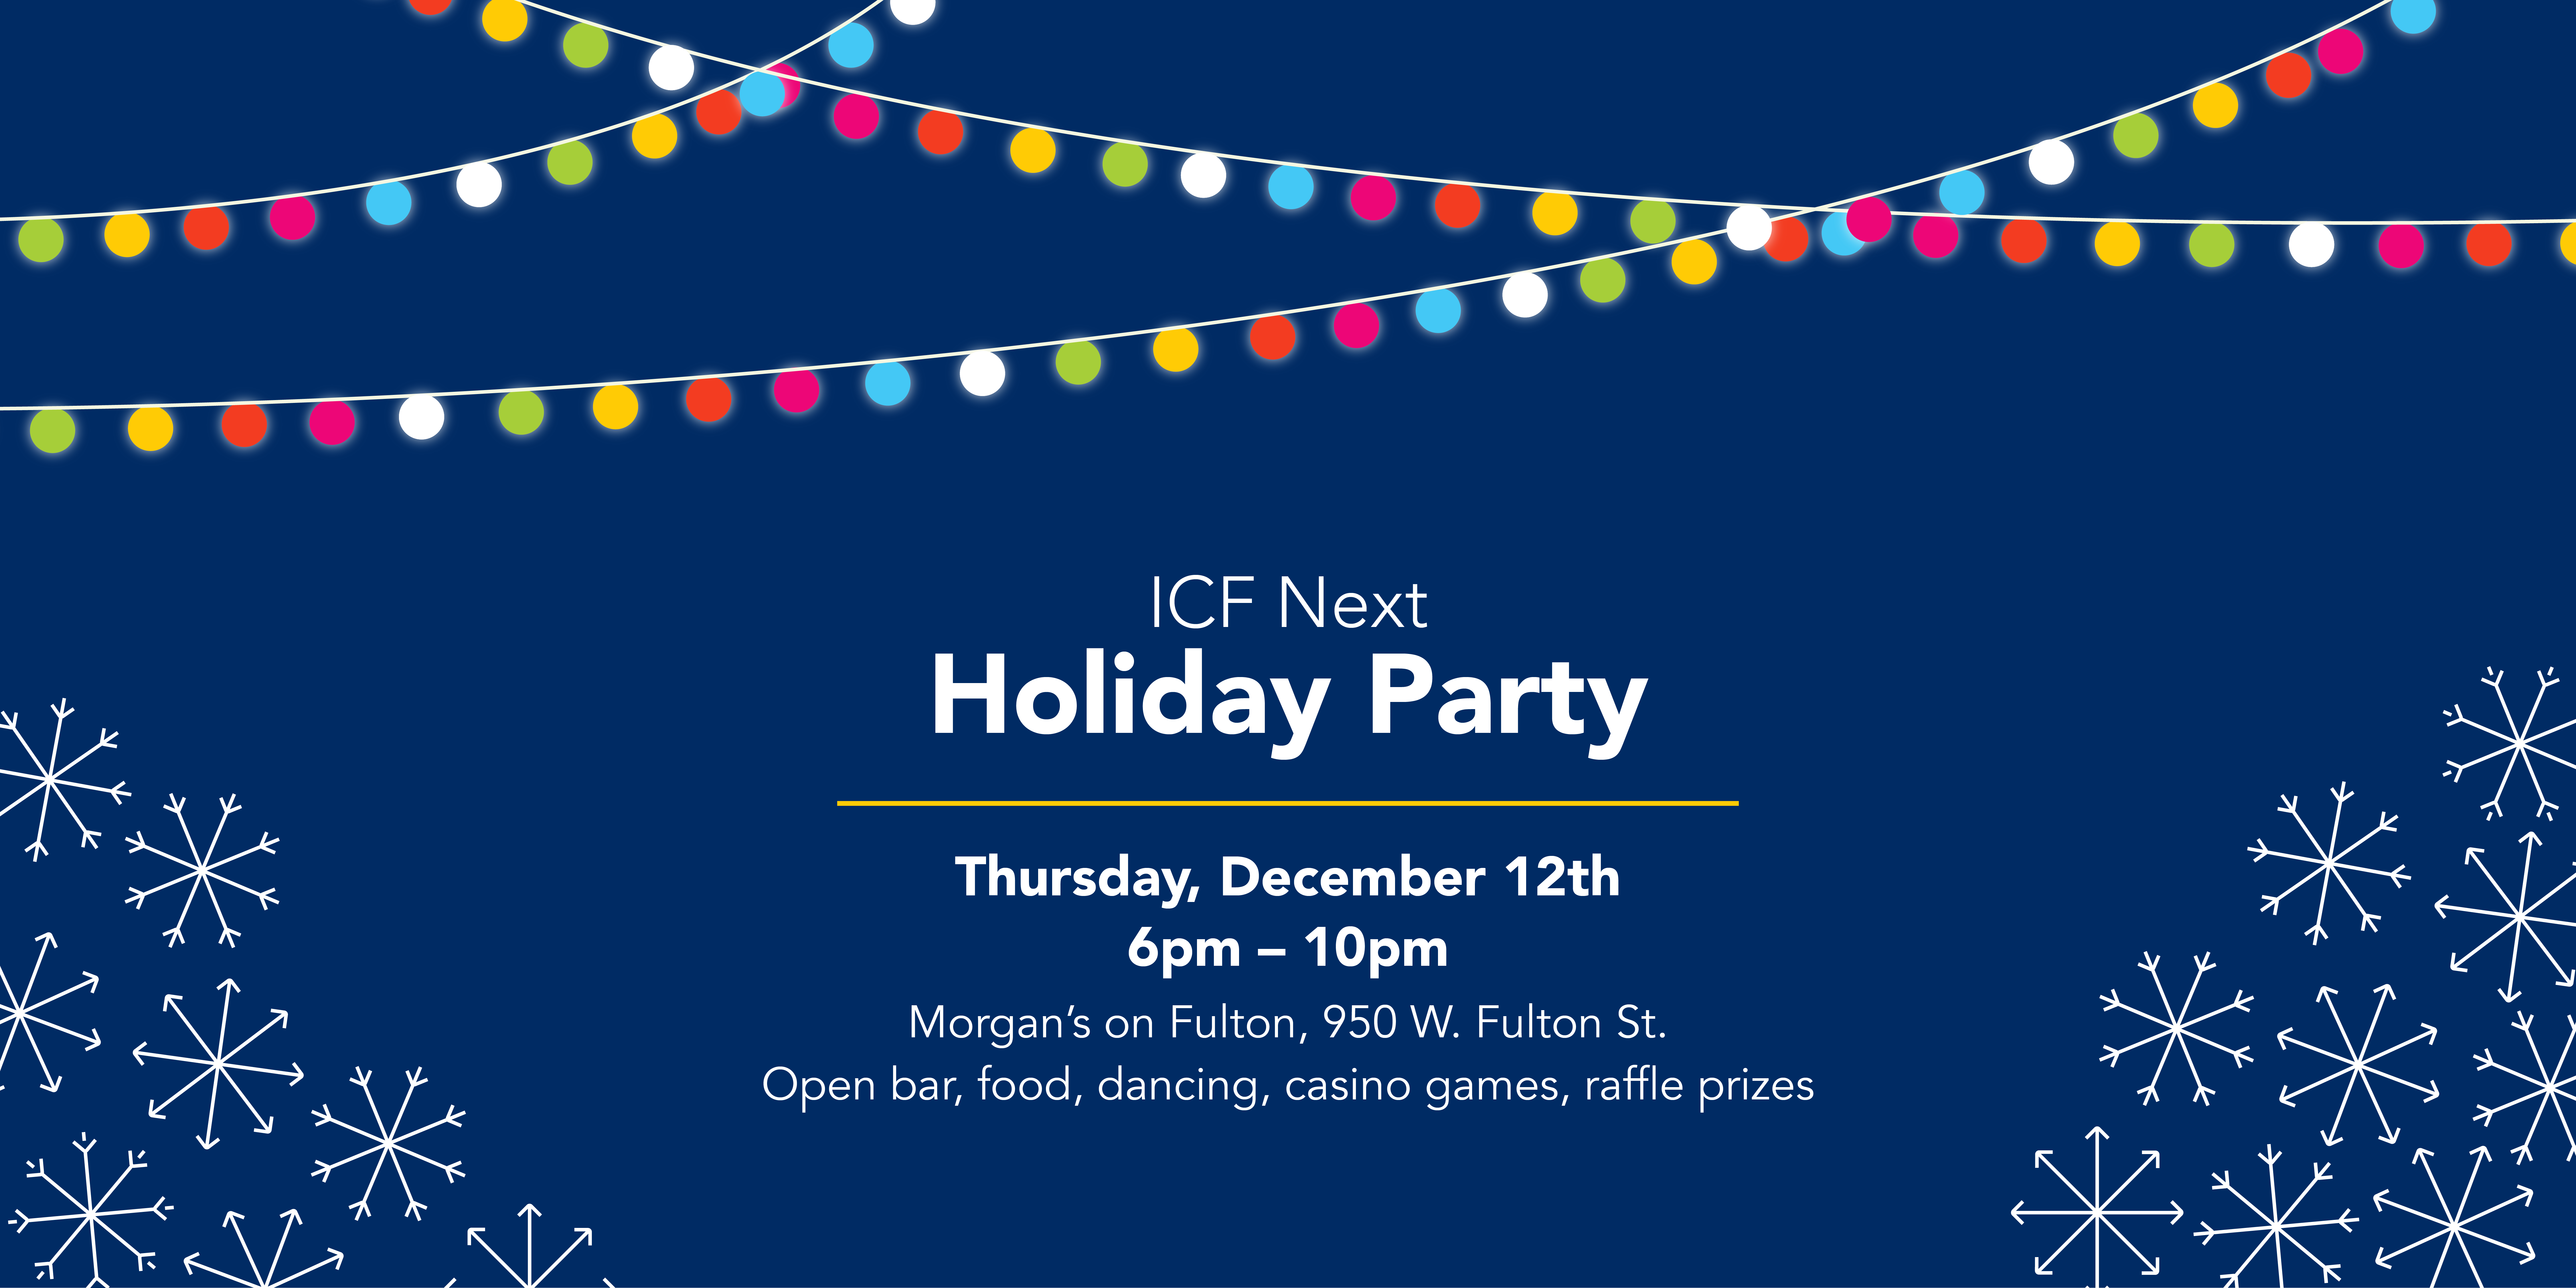 ICF Next Holiday Party